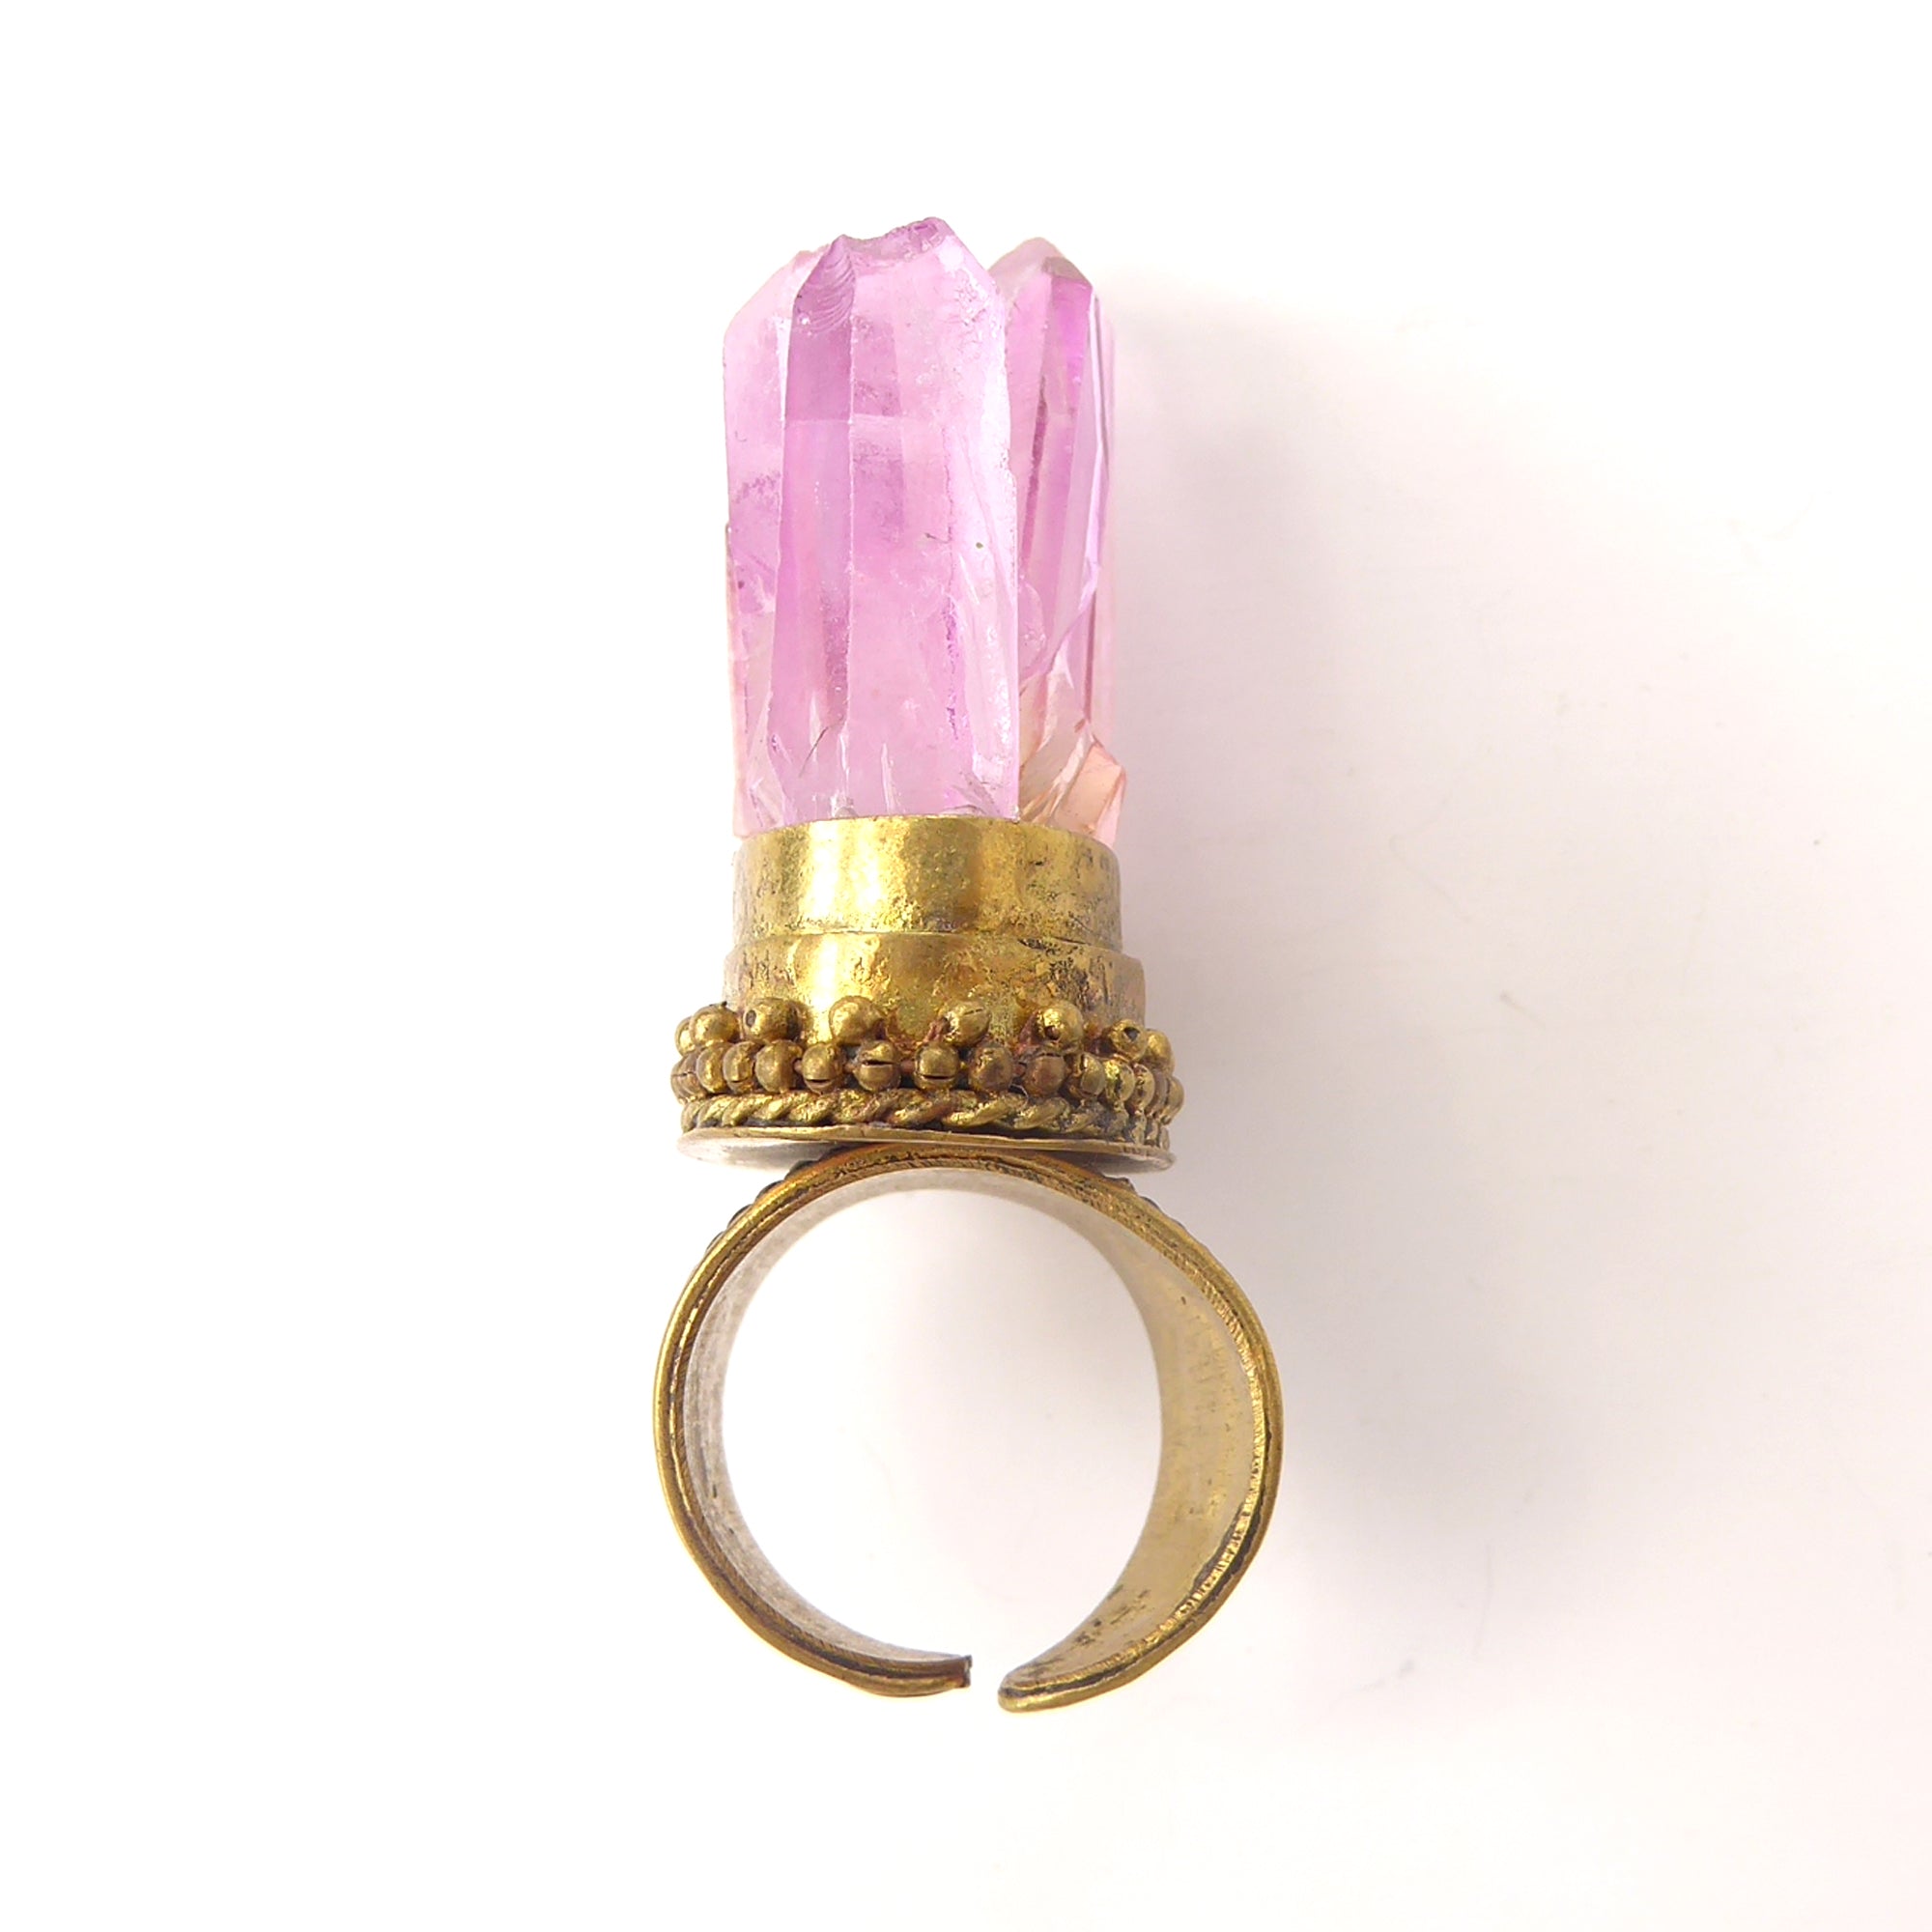 Pink quartz tower ring by Jenny Dayco 2